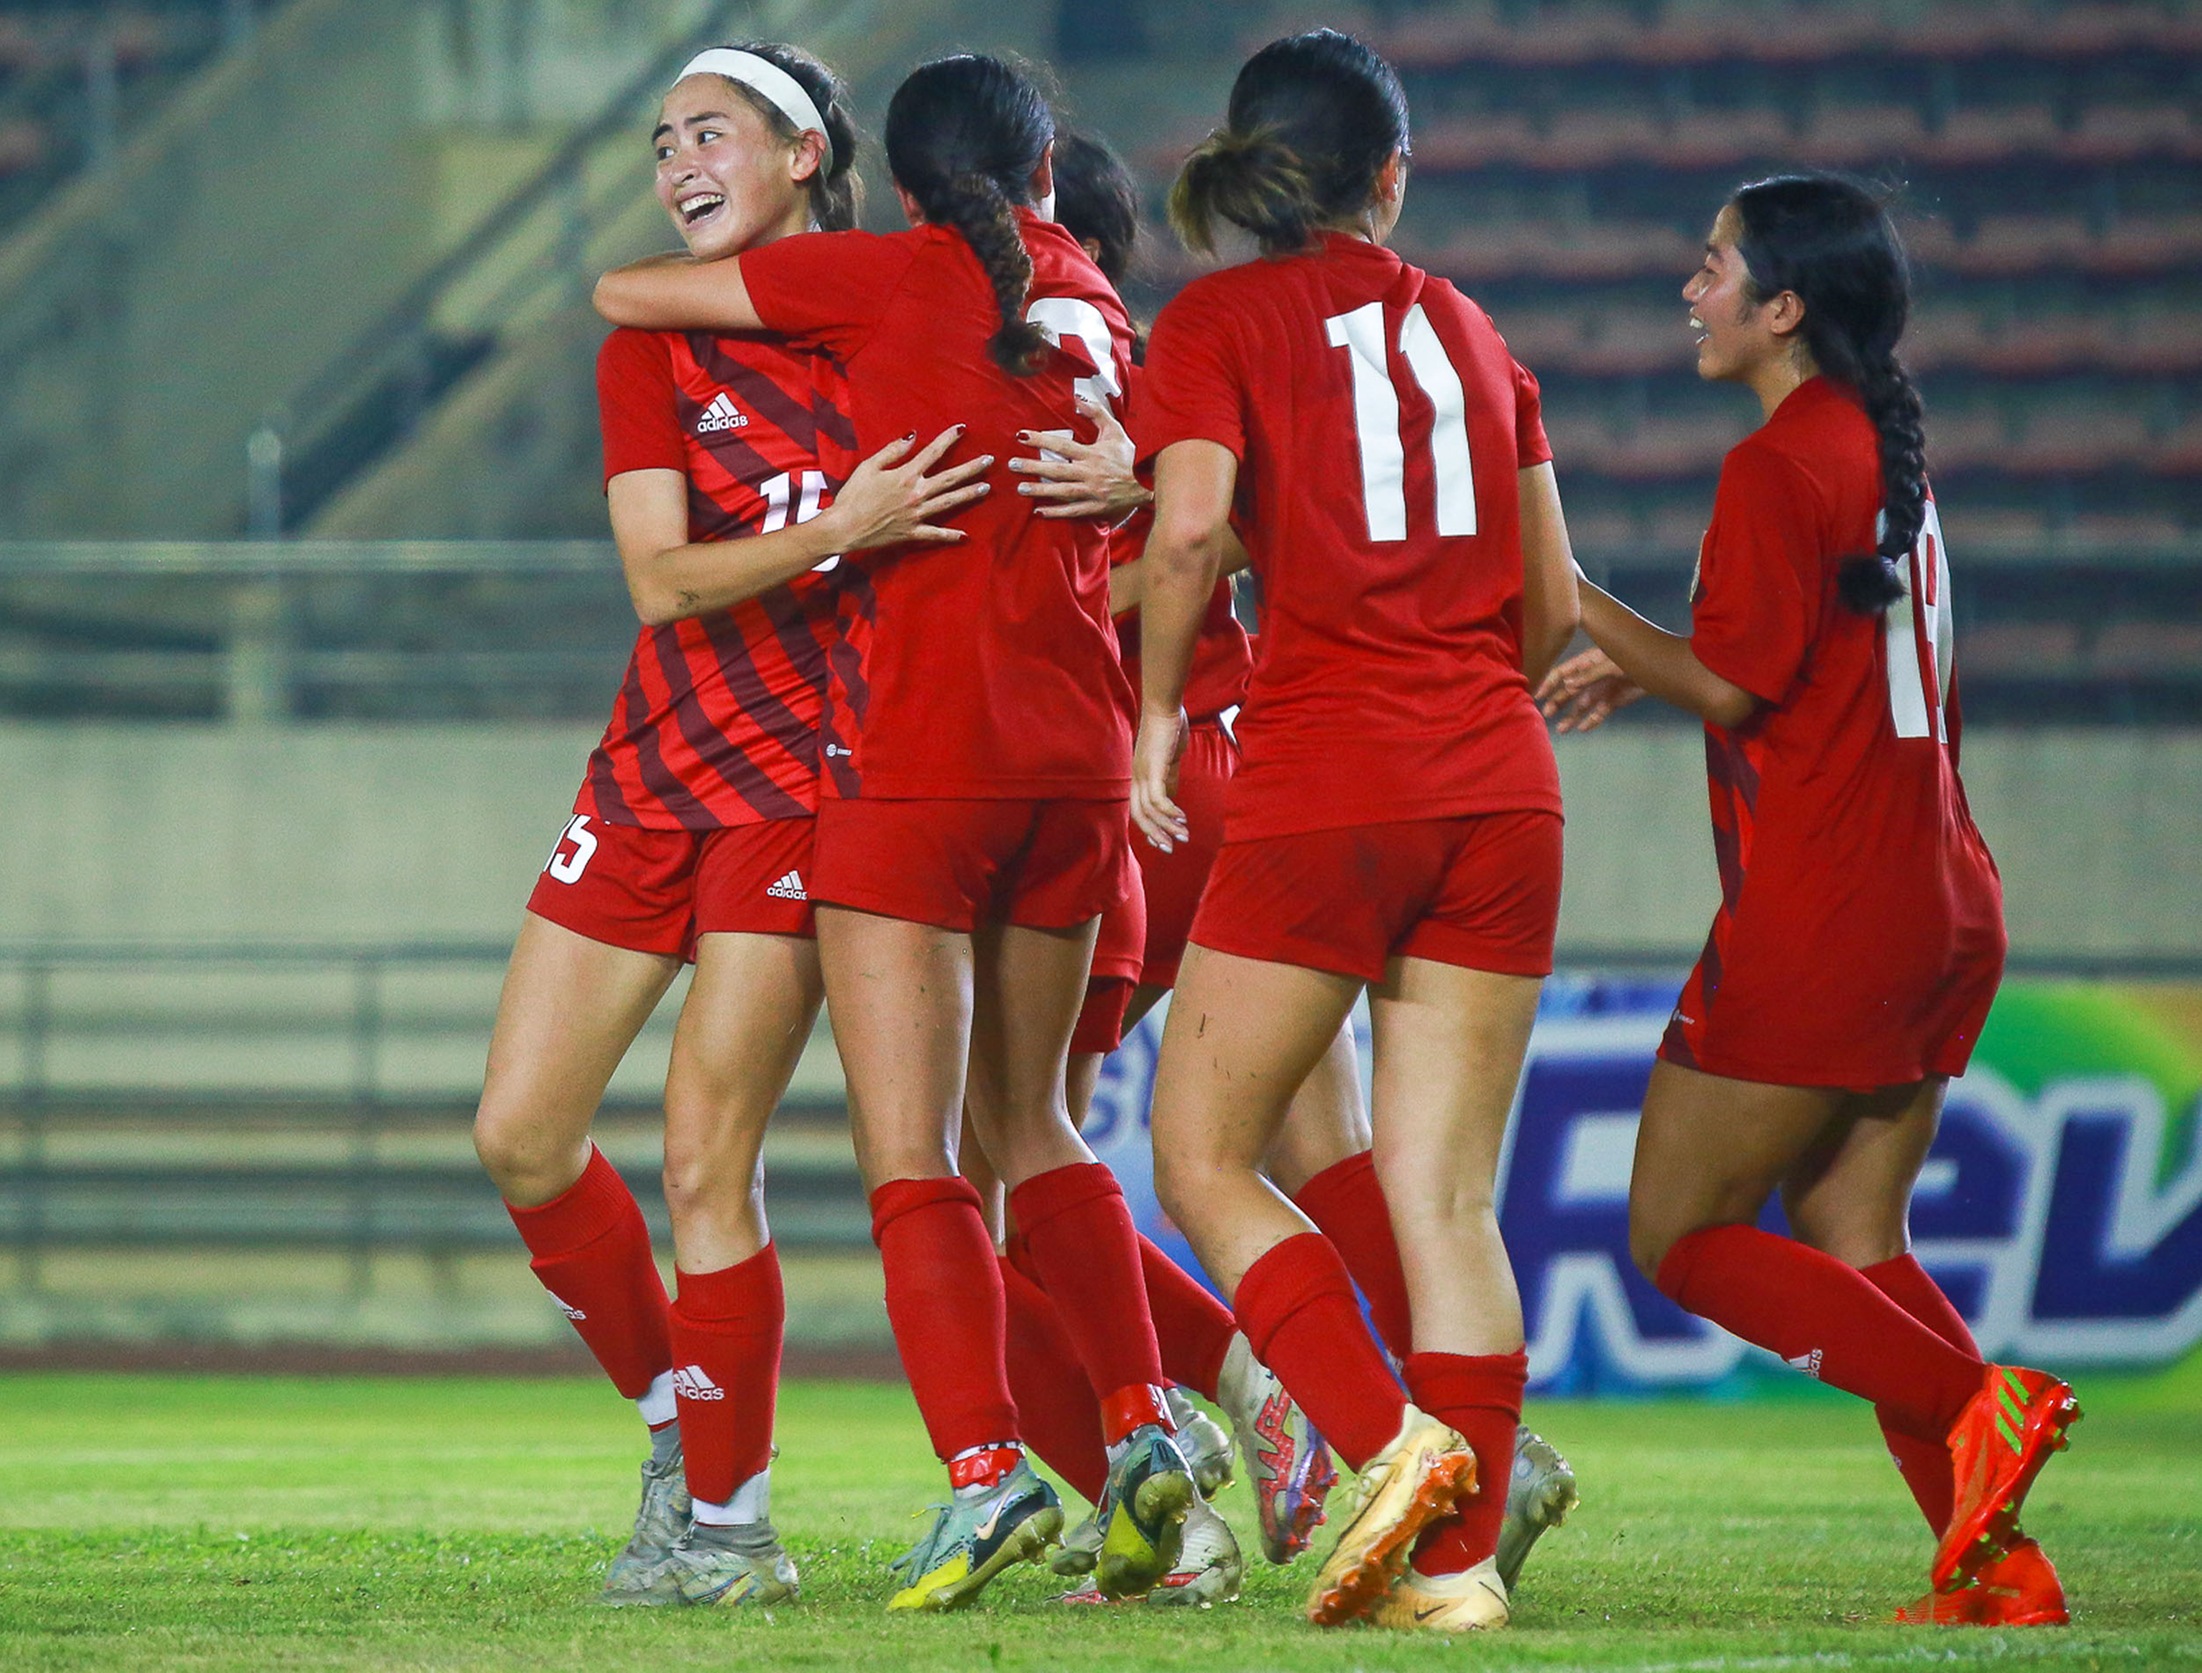 kylie anne yap celebrates with her teammates after scoring a goal in a game for the philippines national team